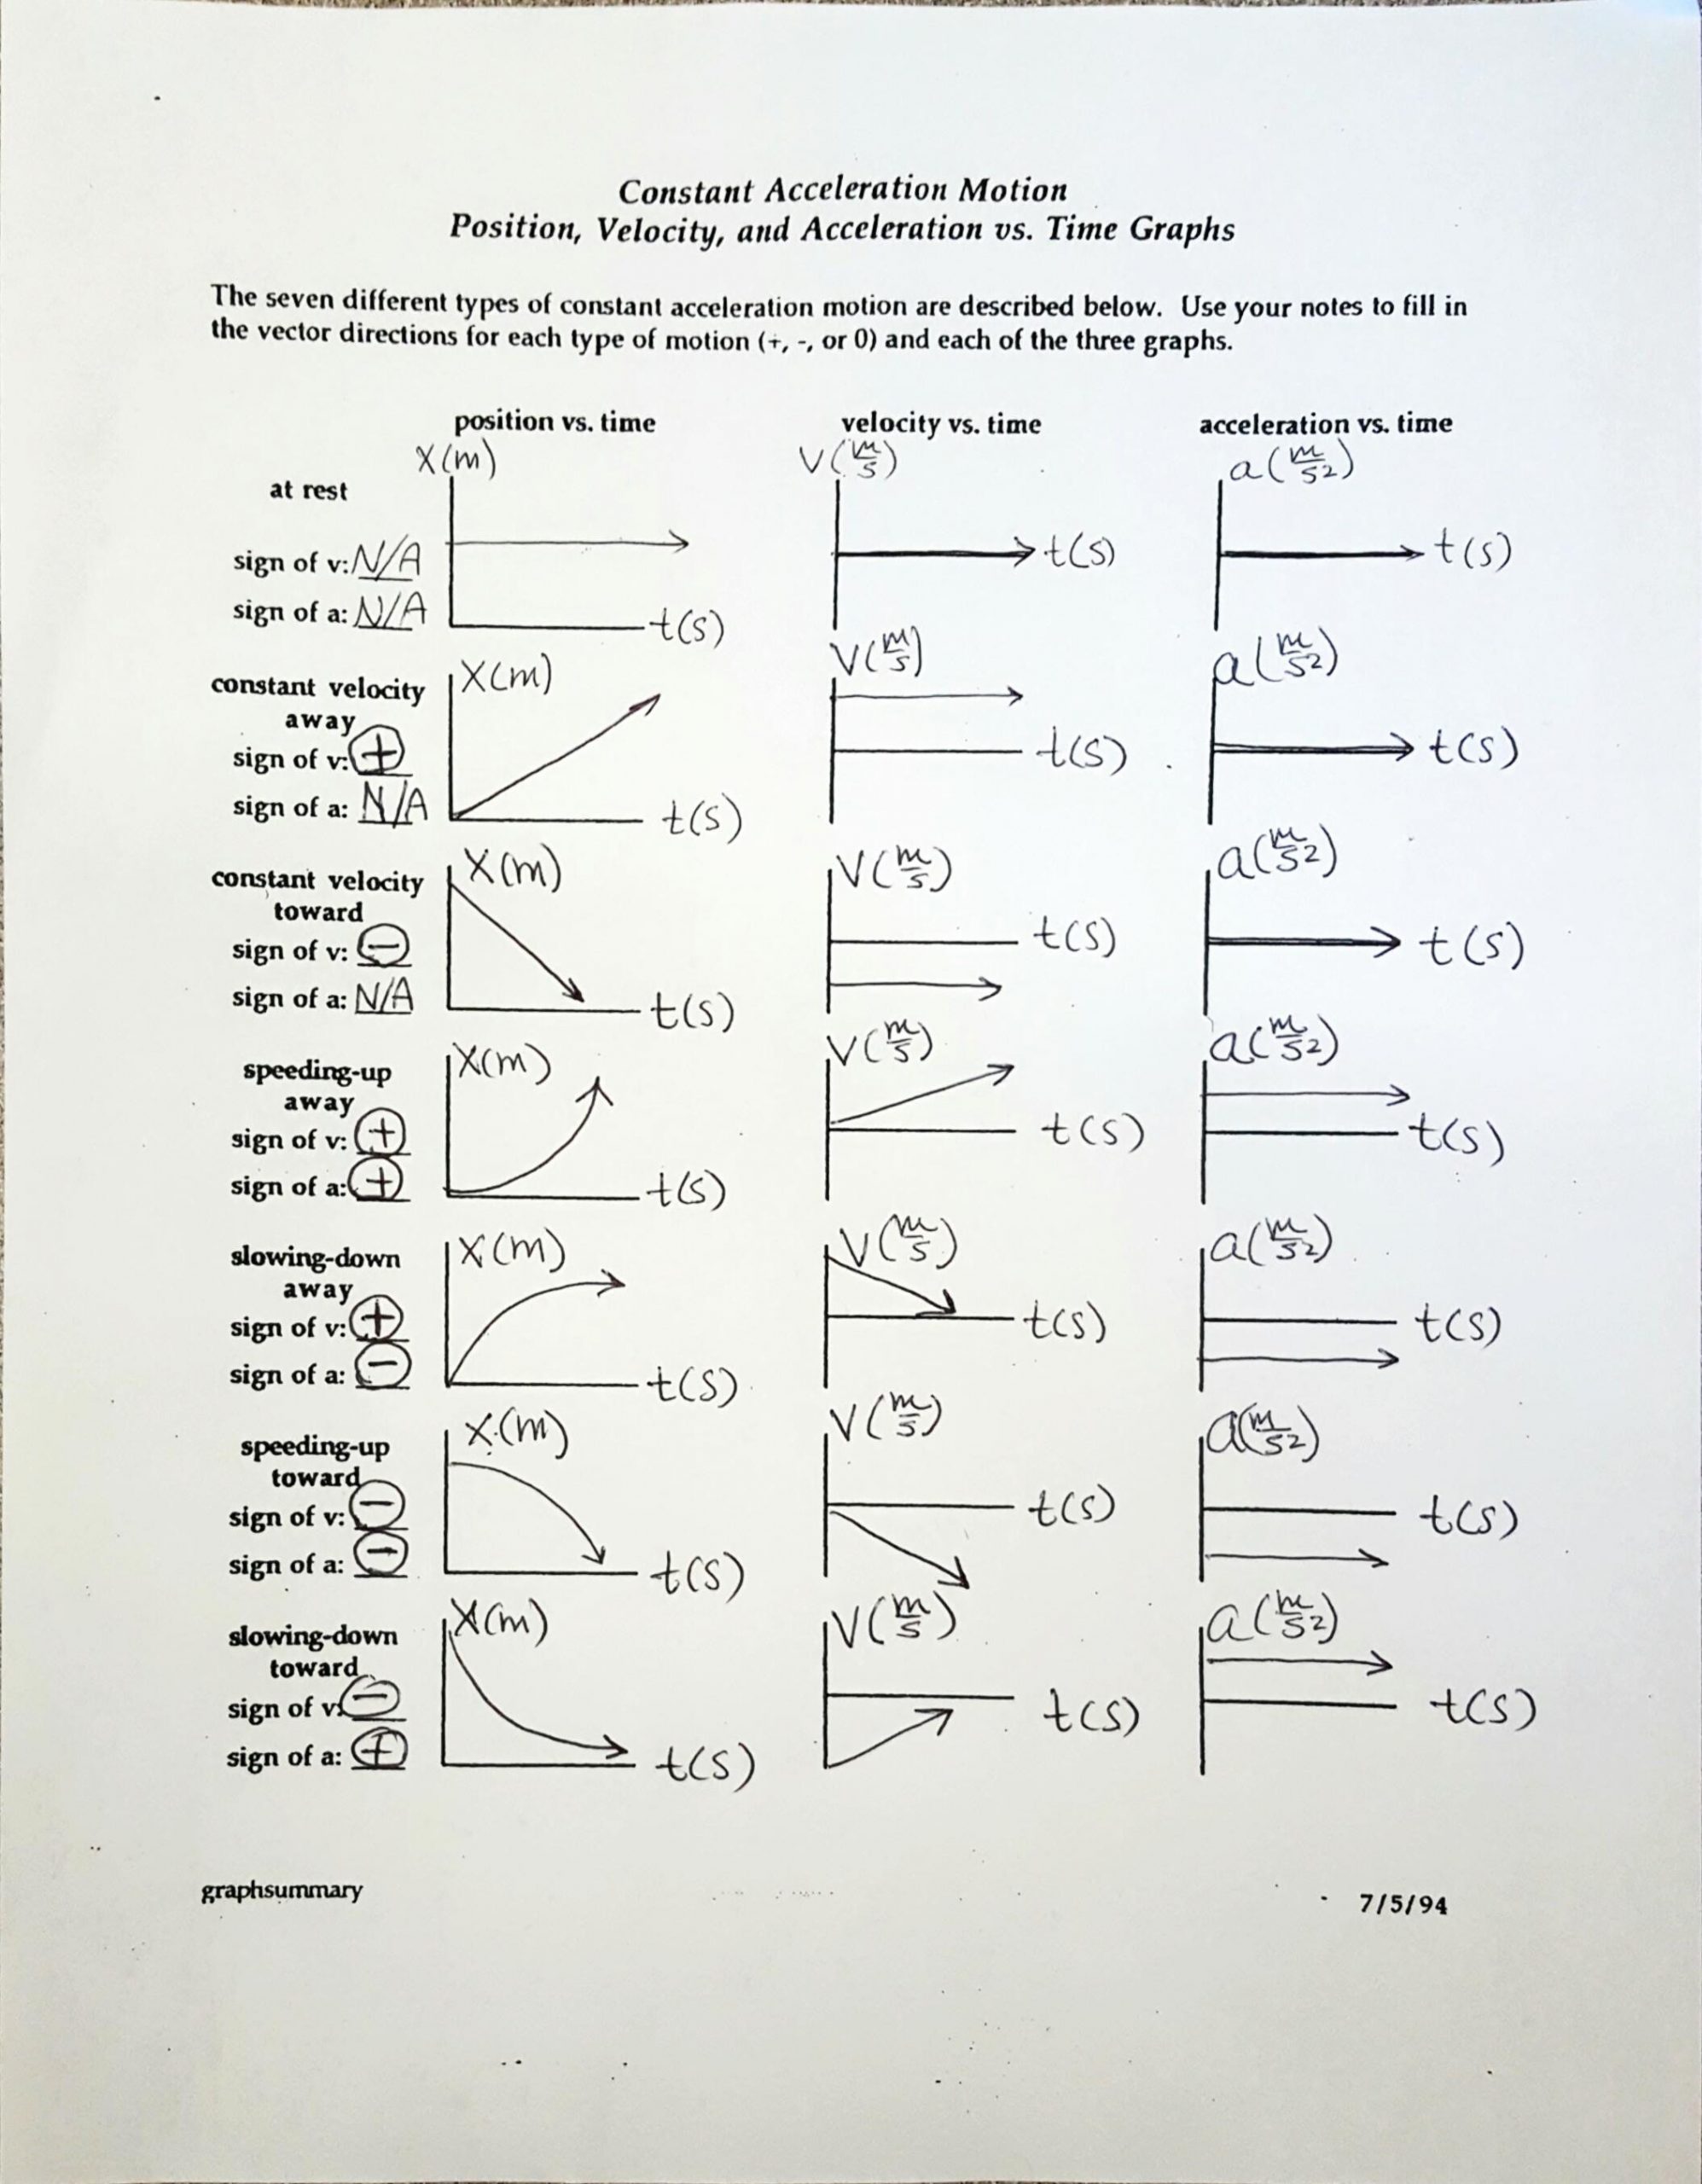 Motion Graphs Worksheet Answers Position and Velocity Vs Time Graphs Worksheet Answers